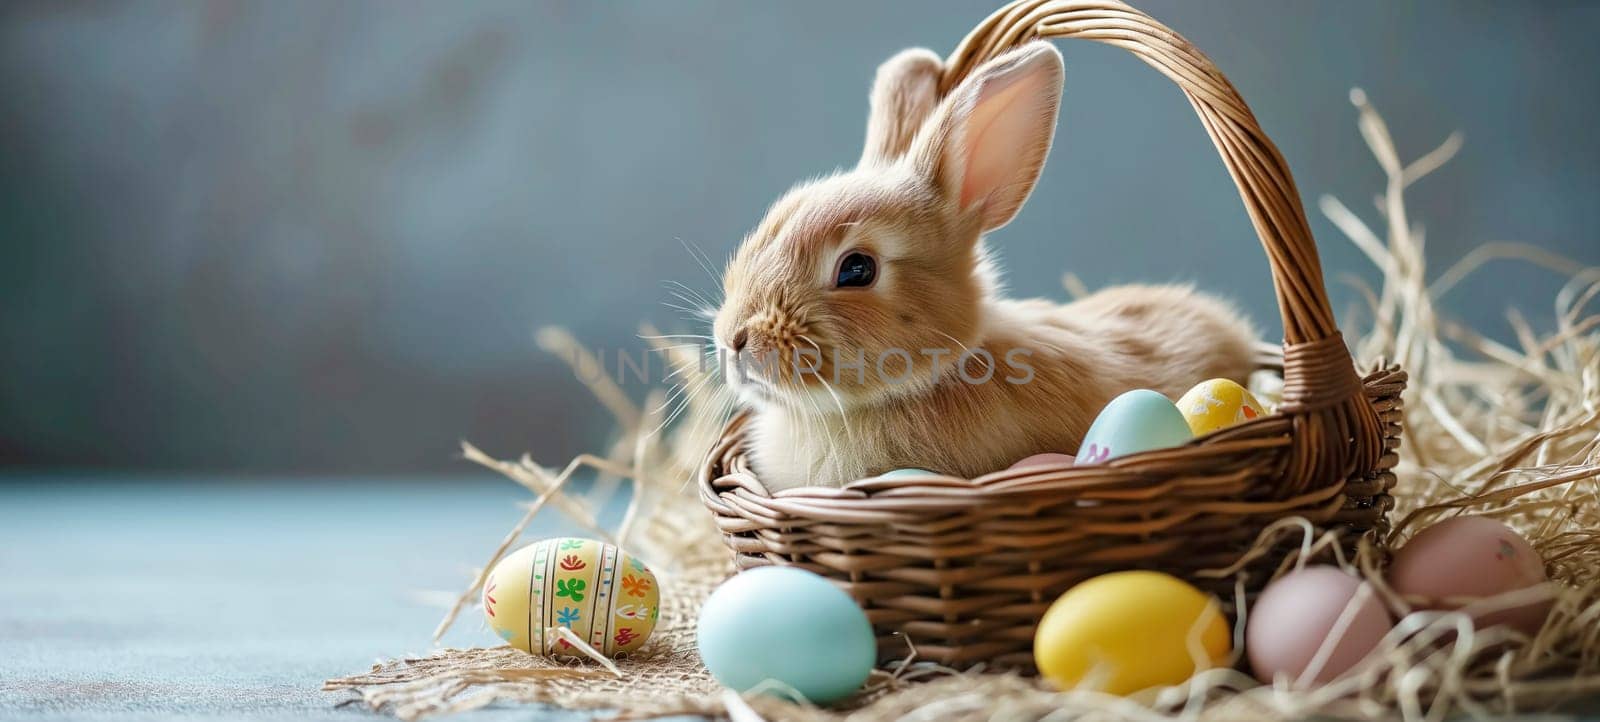 Cute young Easter bunny in a wicker basket with dyed eggs on a wooden table. Easter banner with copy space